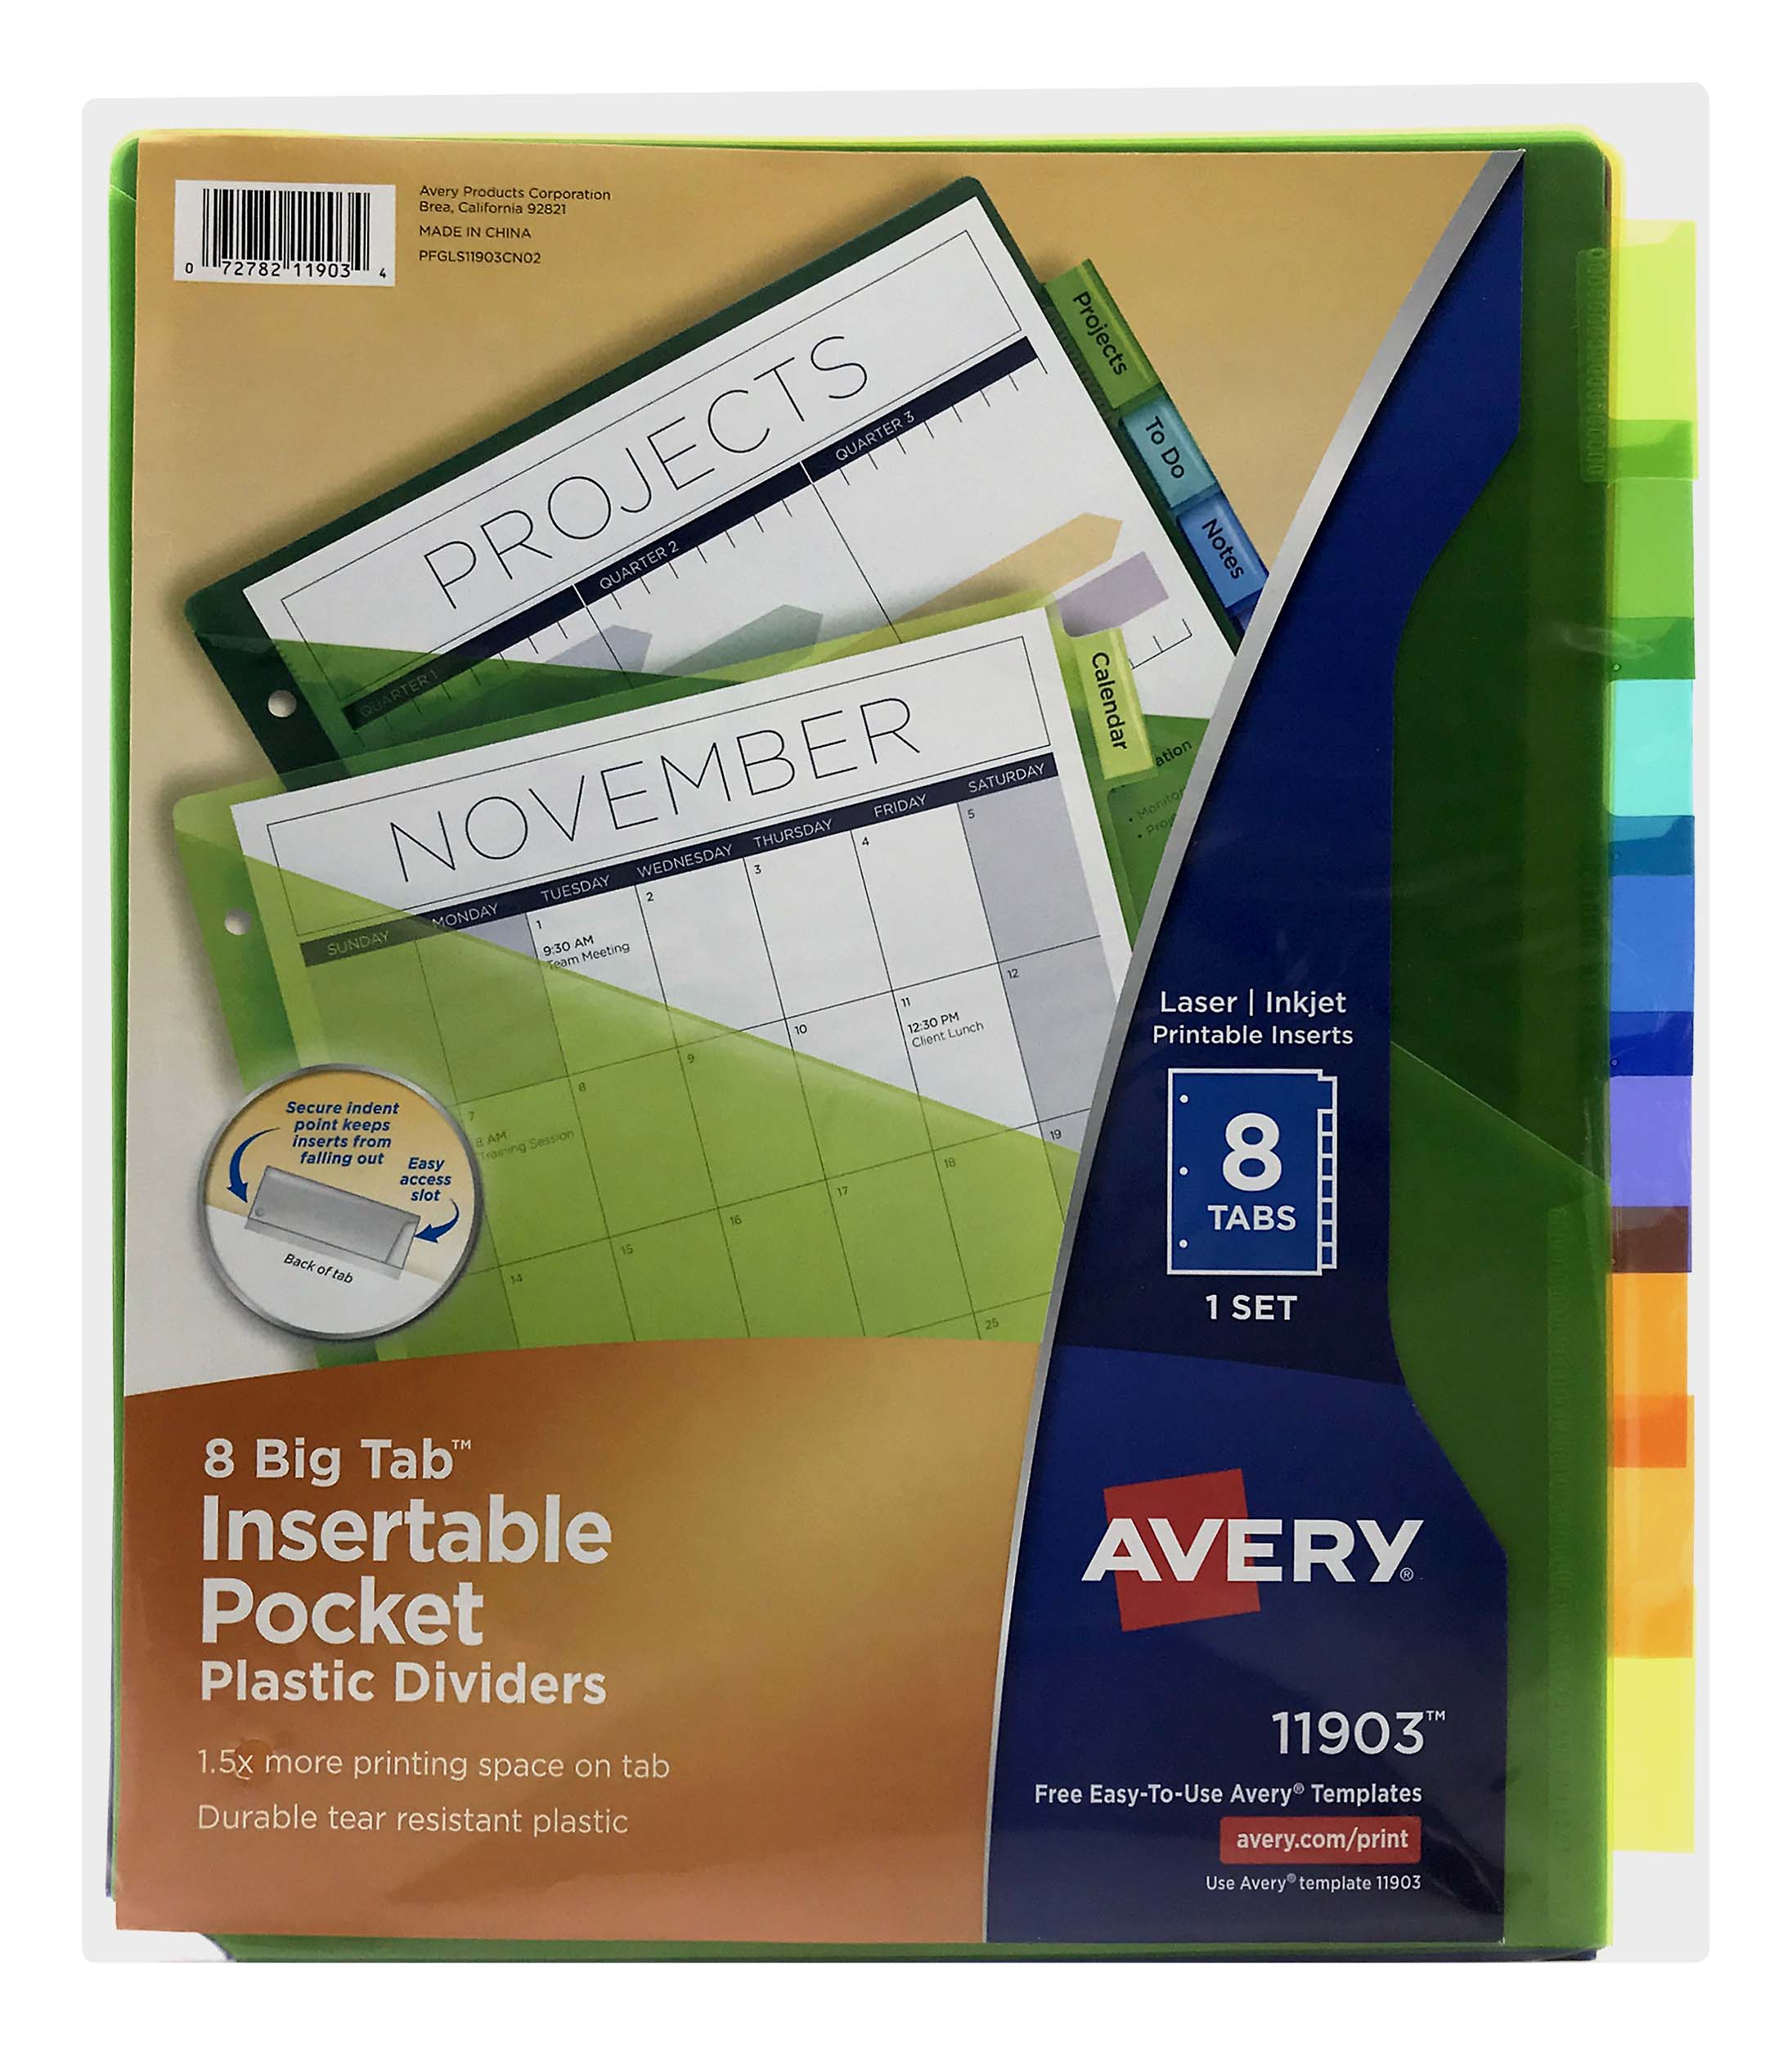 Avery Big Tab Insertable Plastic Dividers with Pockets, 8-Tab Set, Multicolor